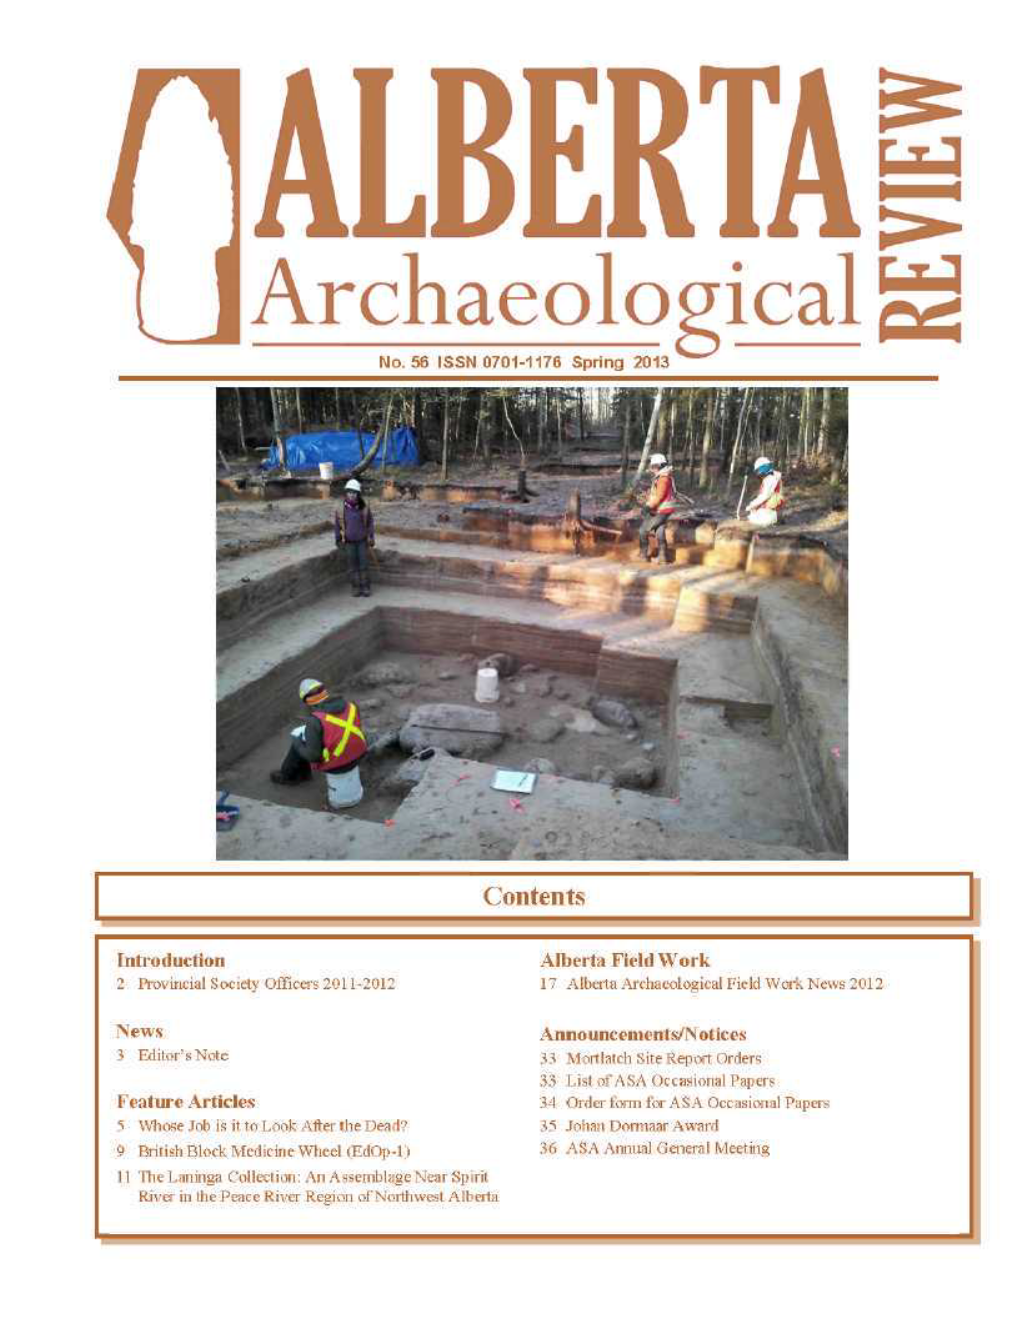 ARCHAEOLOGICAL SOCIETY of ALBERTA Charter #8205, Registered Under the Societies Act of Alberta on February 7, 1975